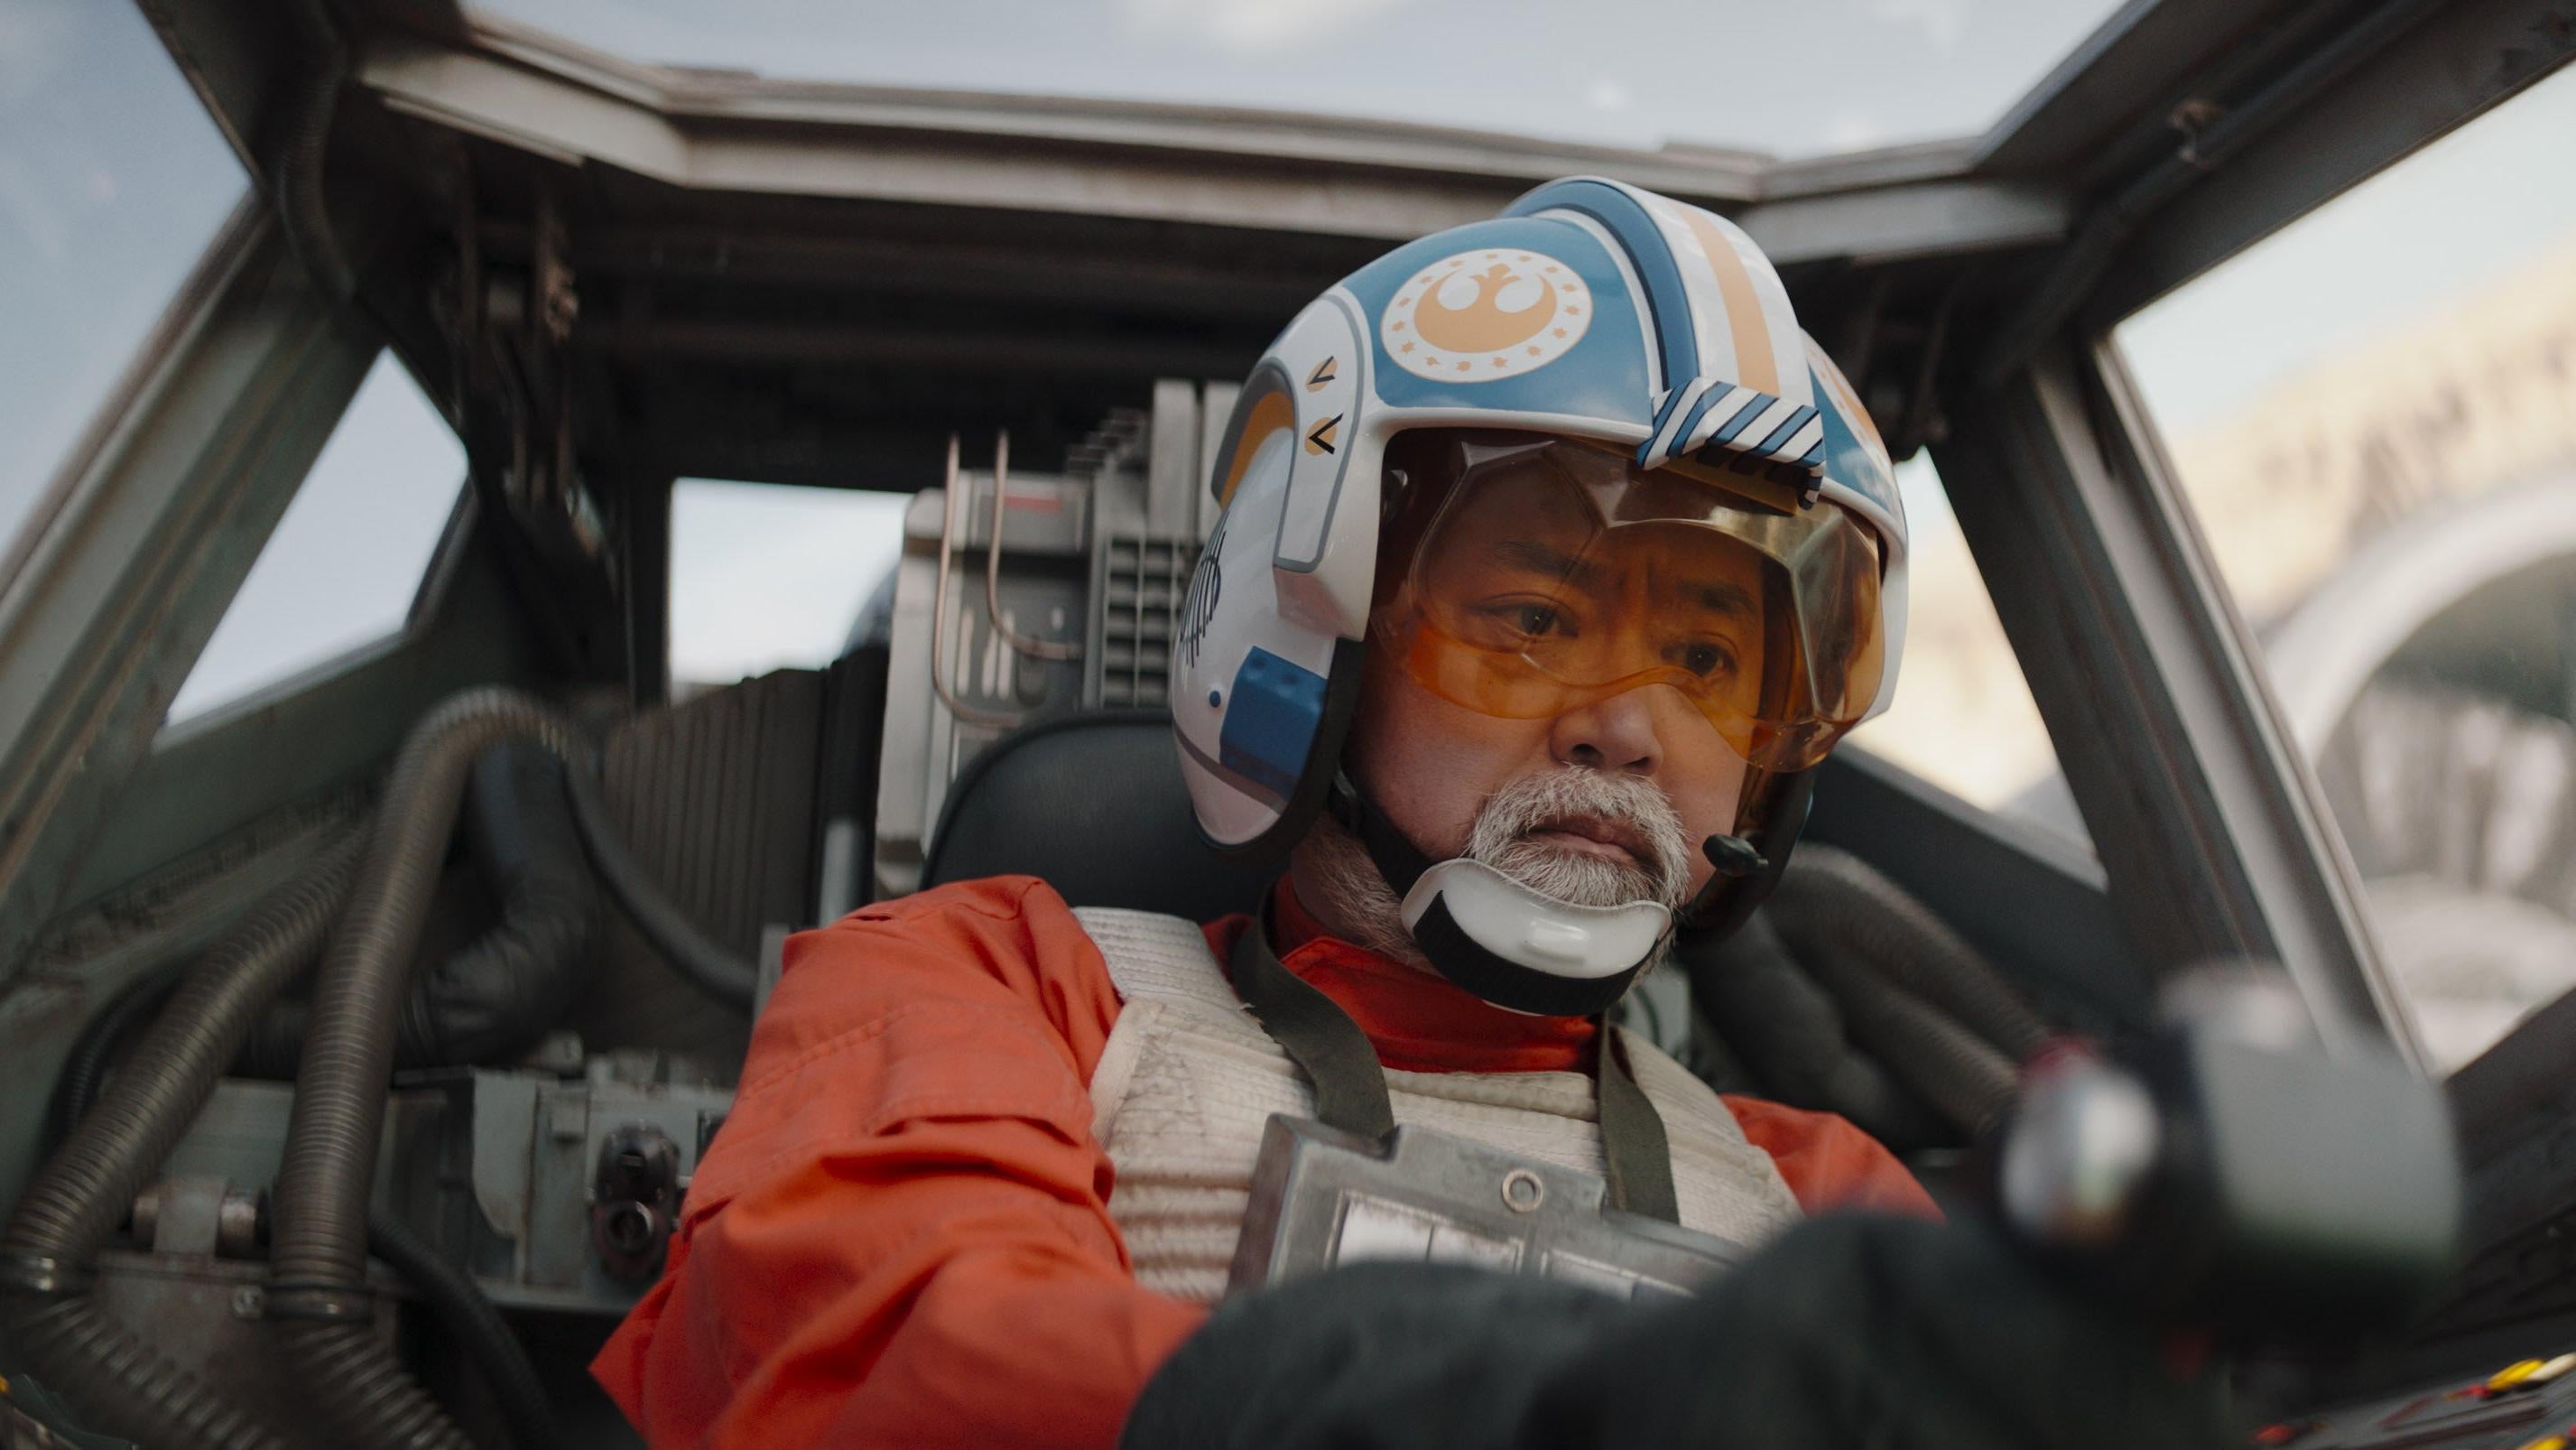 It's great to see Teva (Paul Sun-Hyung Lee) get so much screen time. (Image: Lucasfilm)